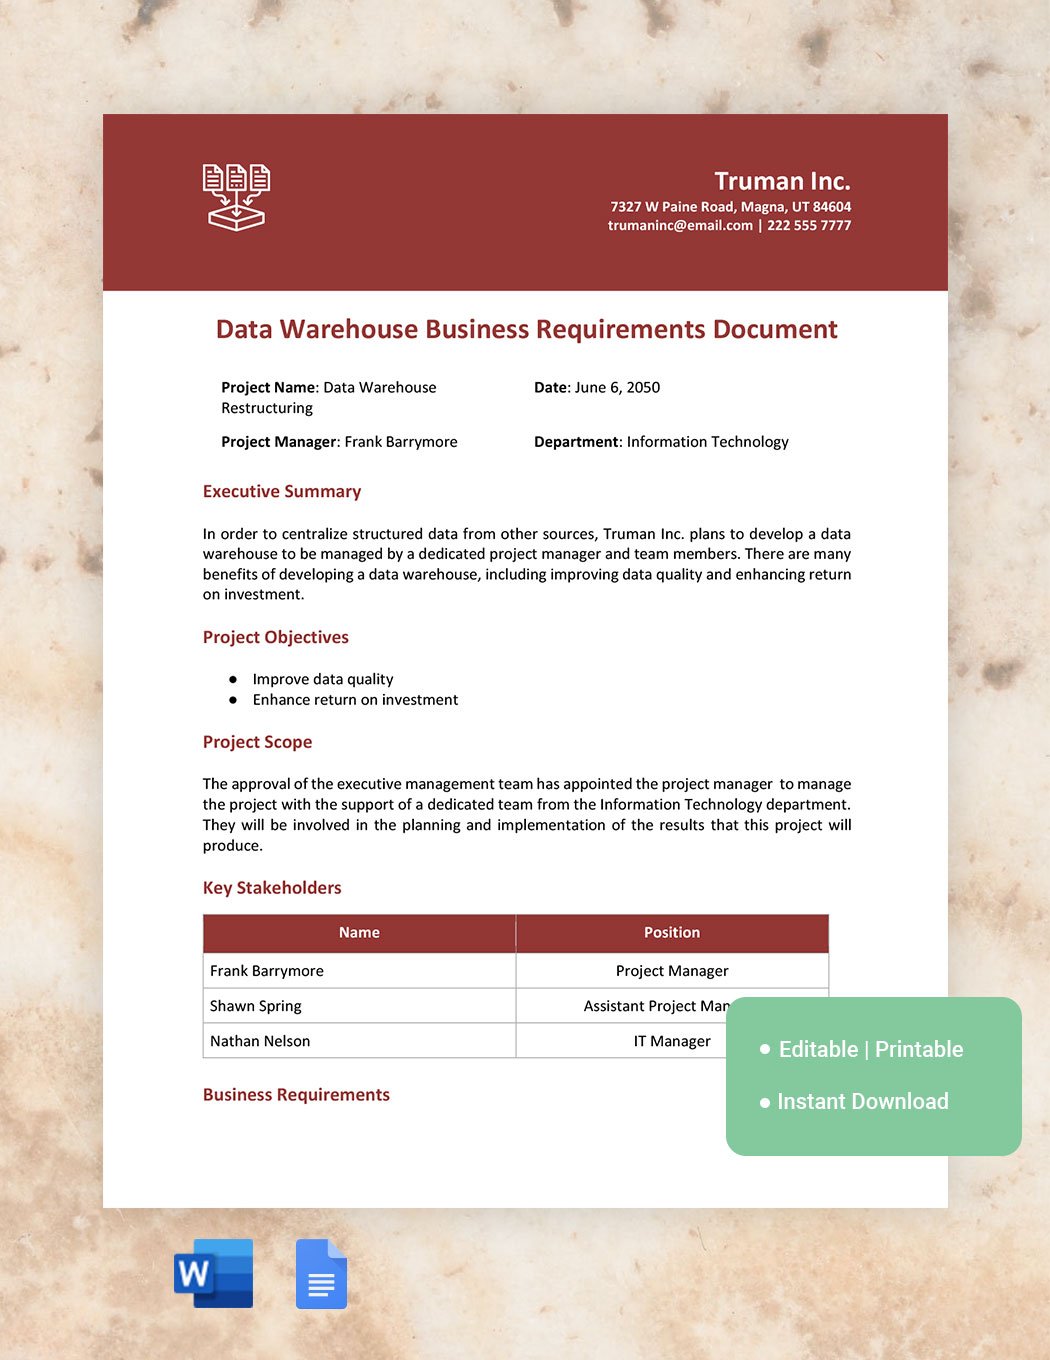 Data Warehouse Business Requirements Document Template